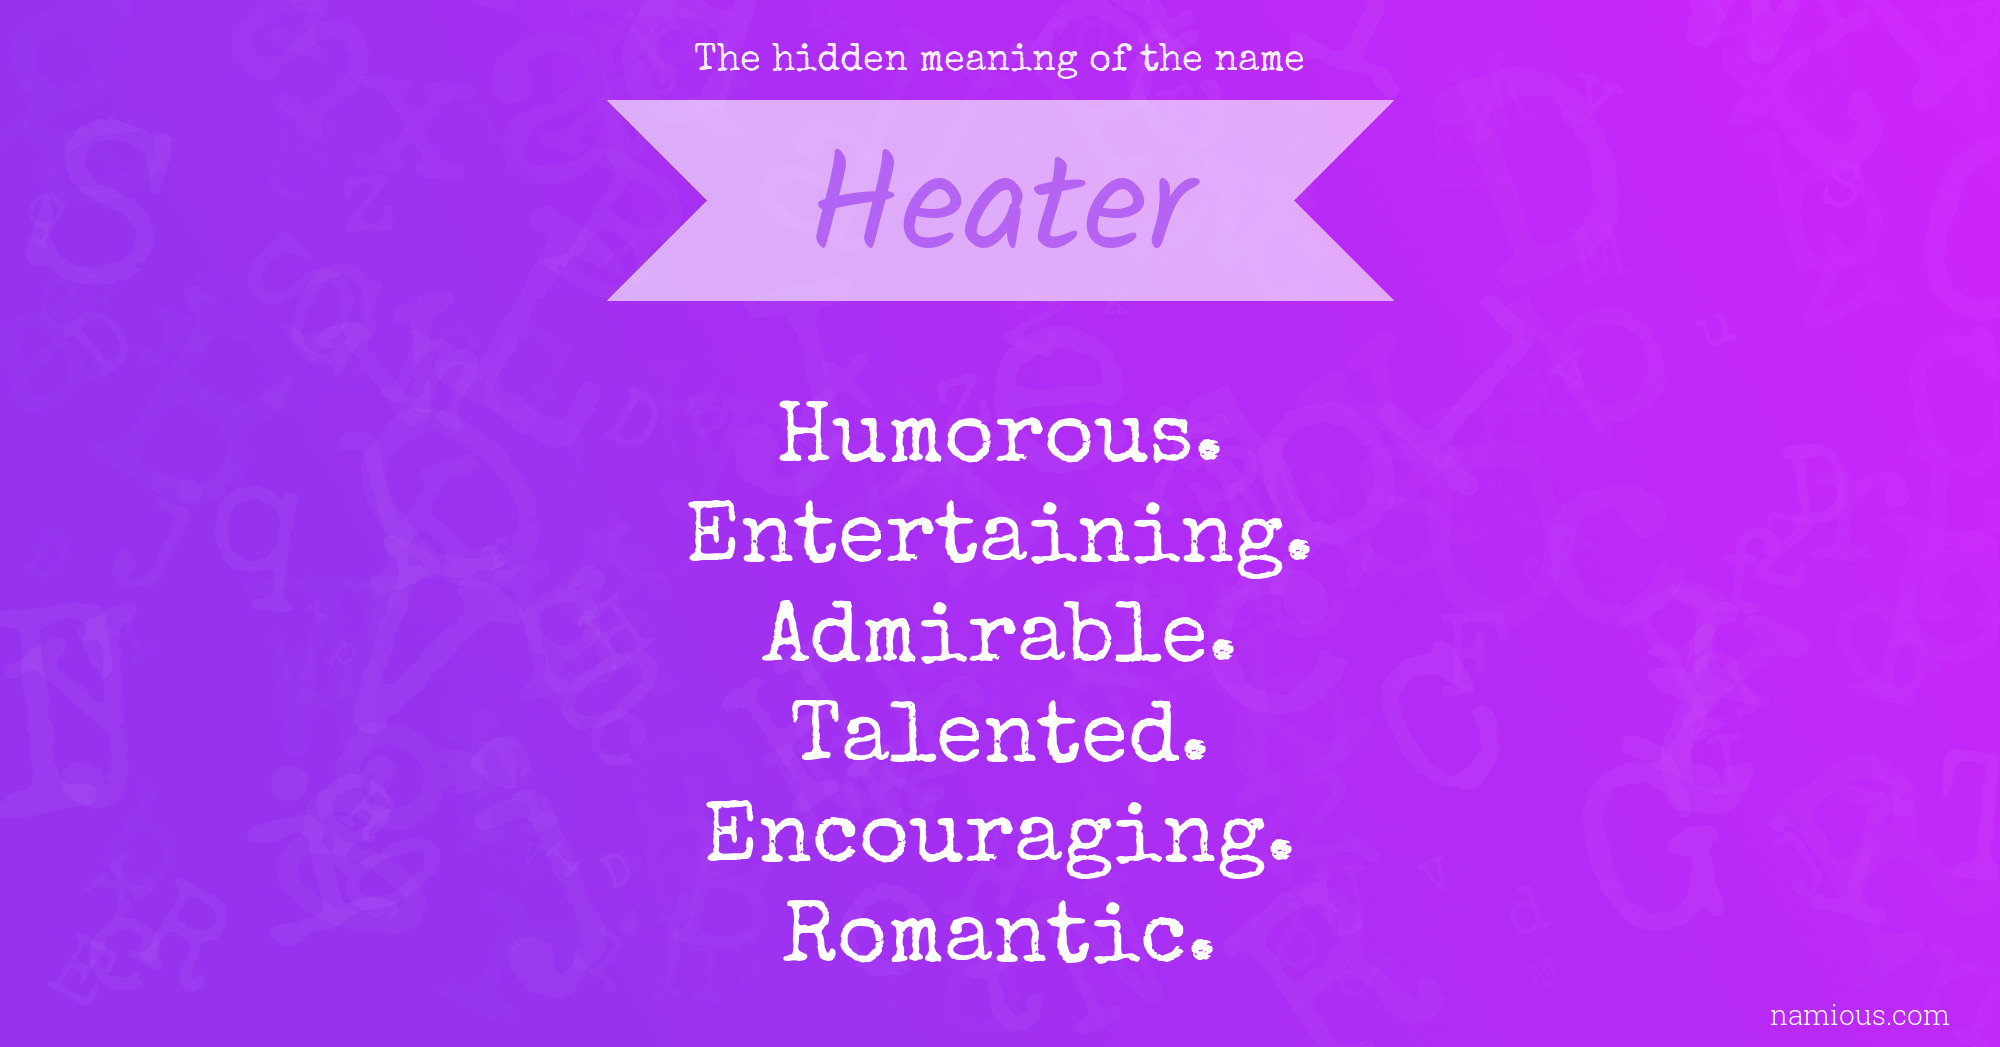 The hidden meaning of the name Heater